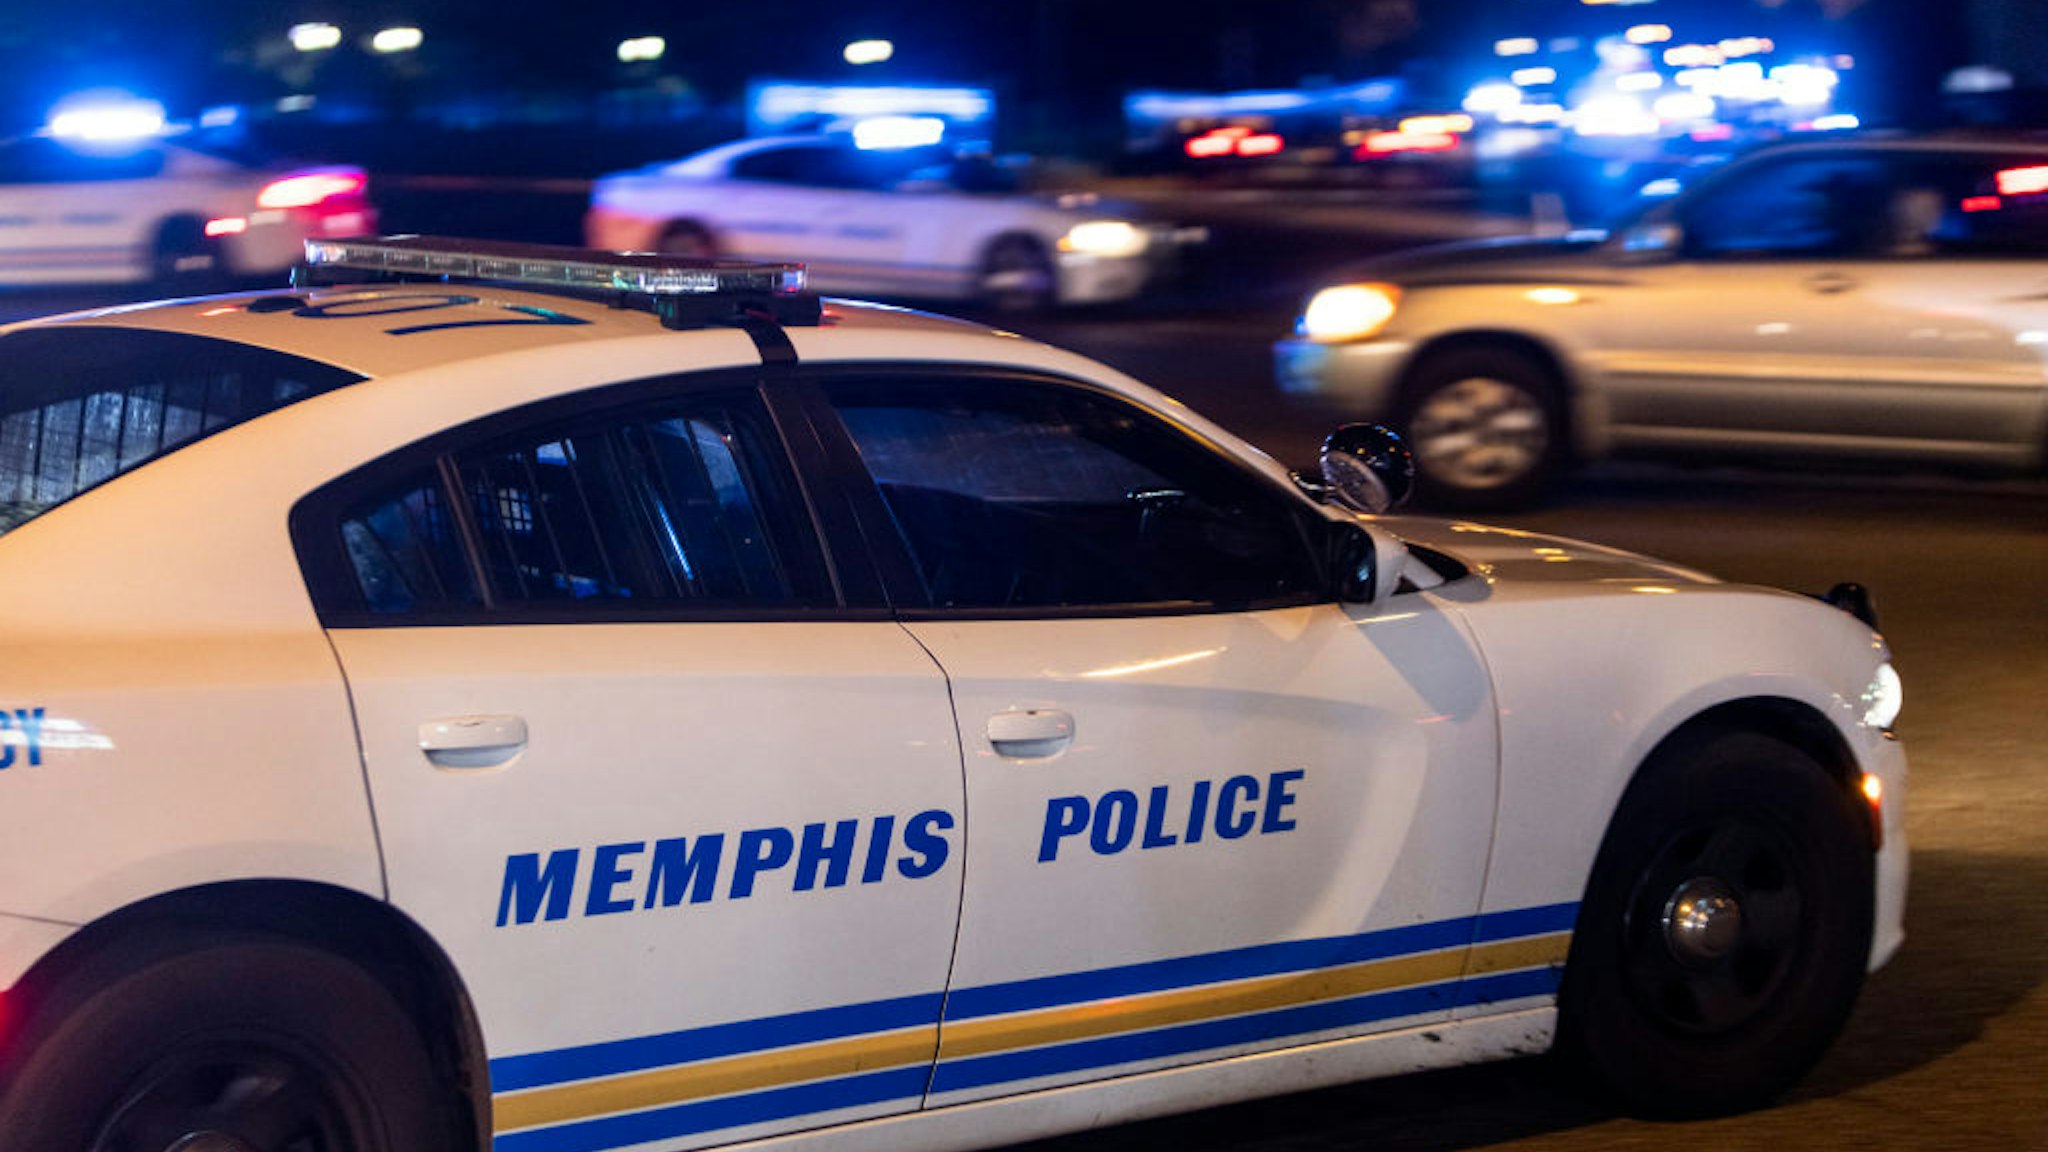 MEMPHIS, TENNESSEE - SEPTEMBER 7: Police investigate the scene of a reported carjacking reportedly connected to a series of shootings on September 7, 2022 in Memphis, Tennessee. Memphis police arrested a 19-year-old man in connection with the shootings of multiple people across the city while allegedly livestreaming the crimes on Facebook, according to published reports.